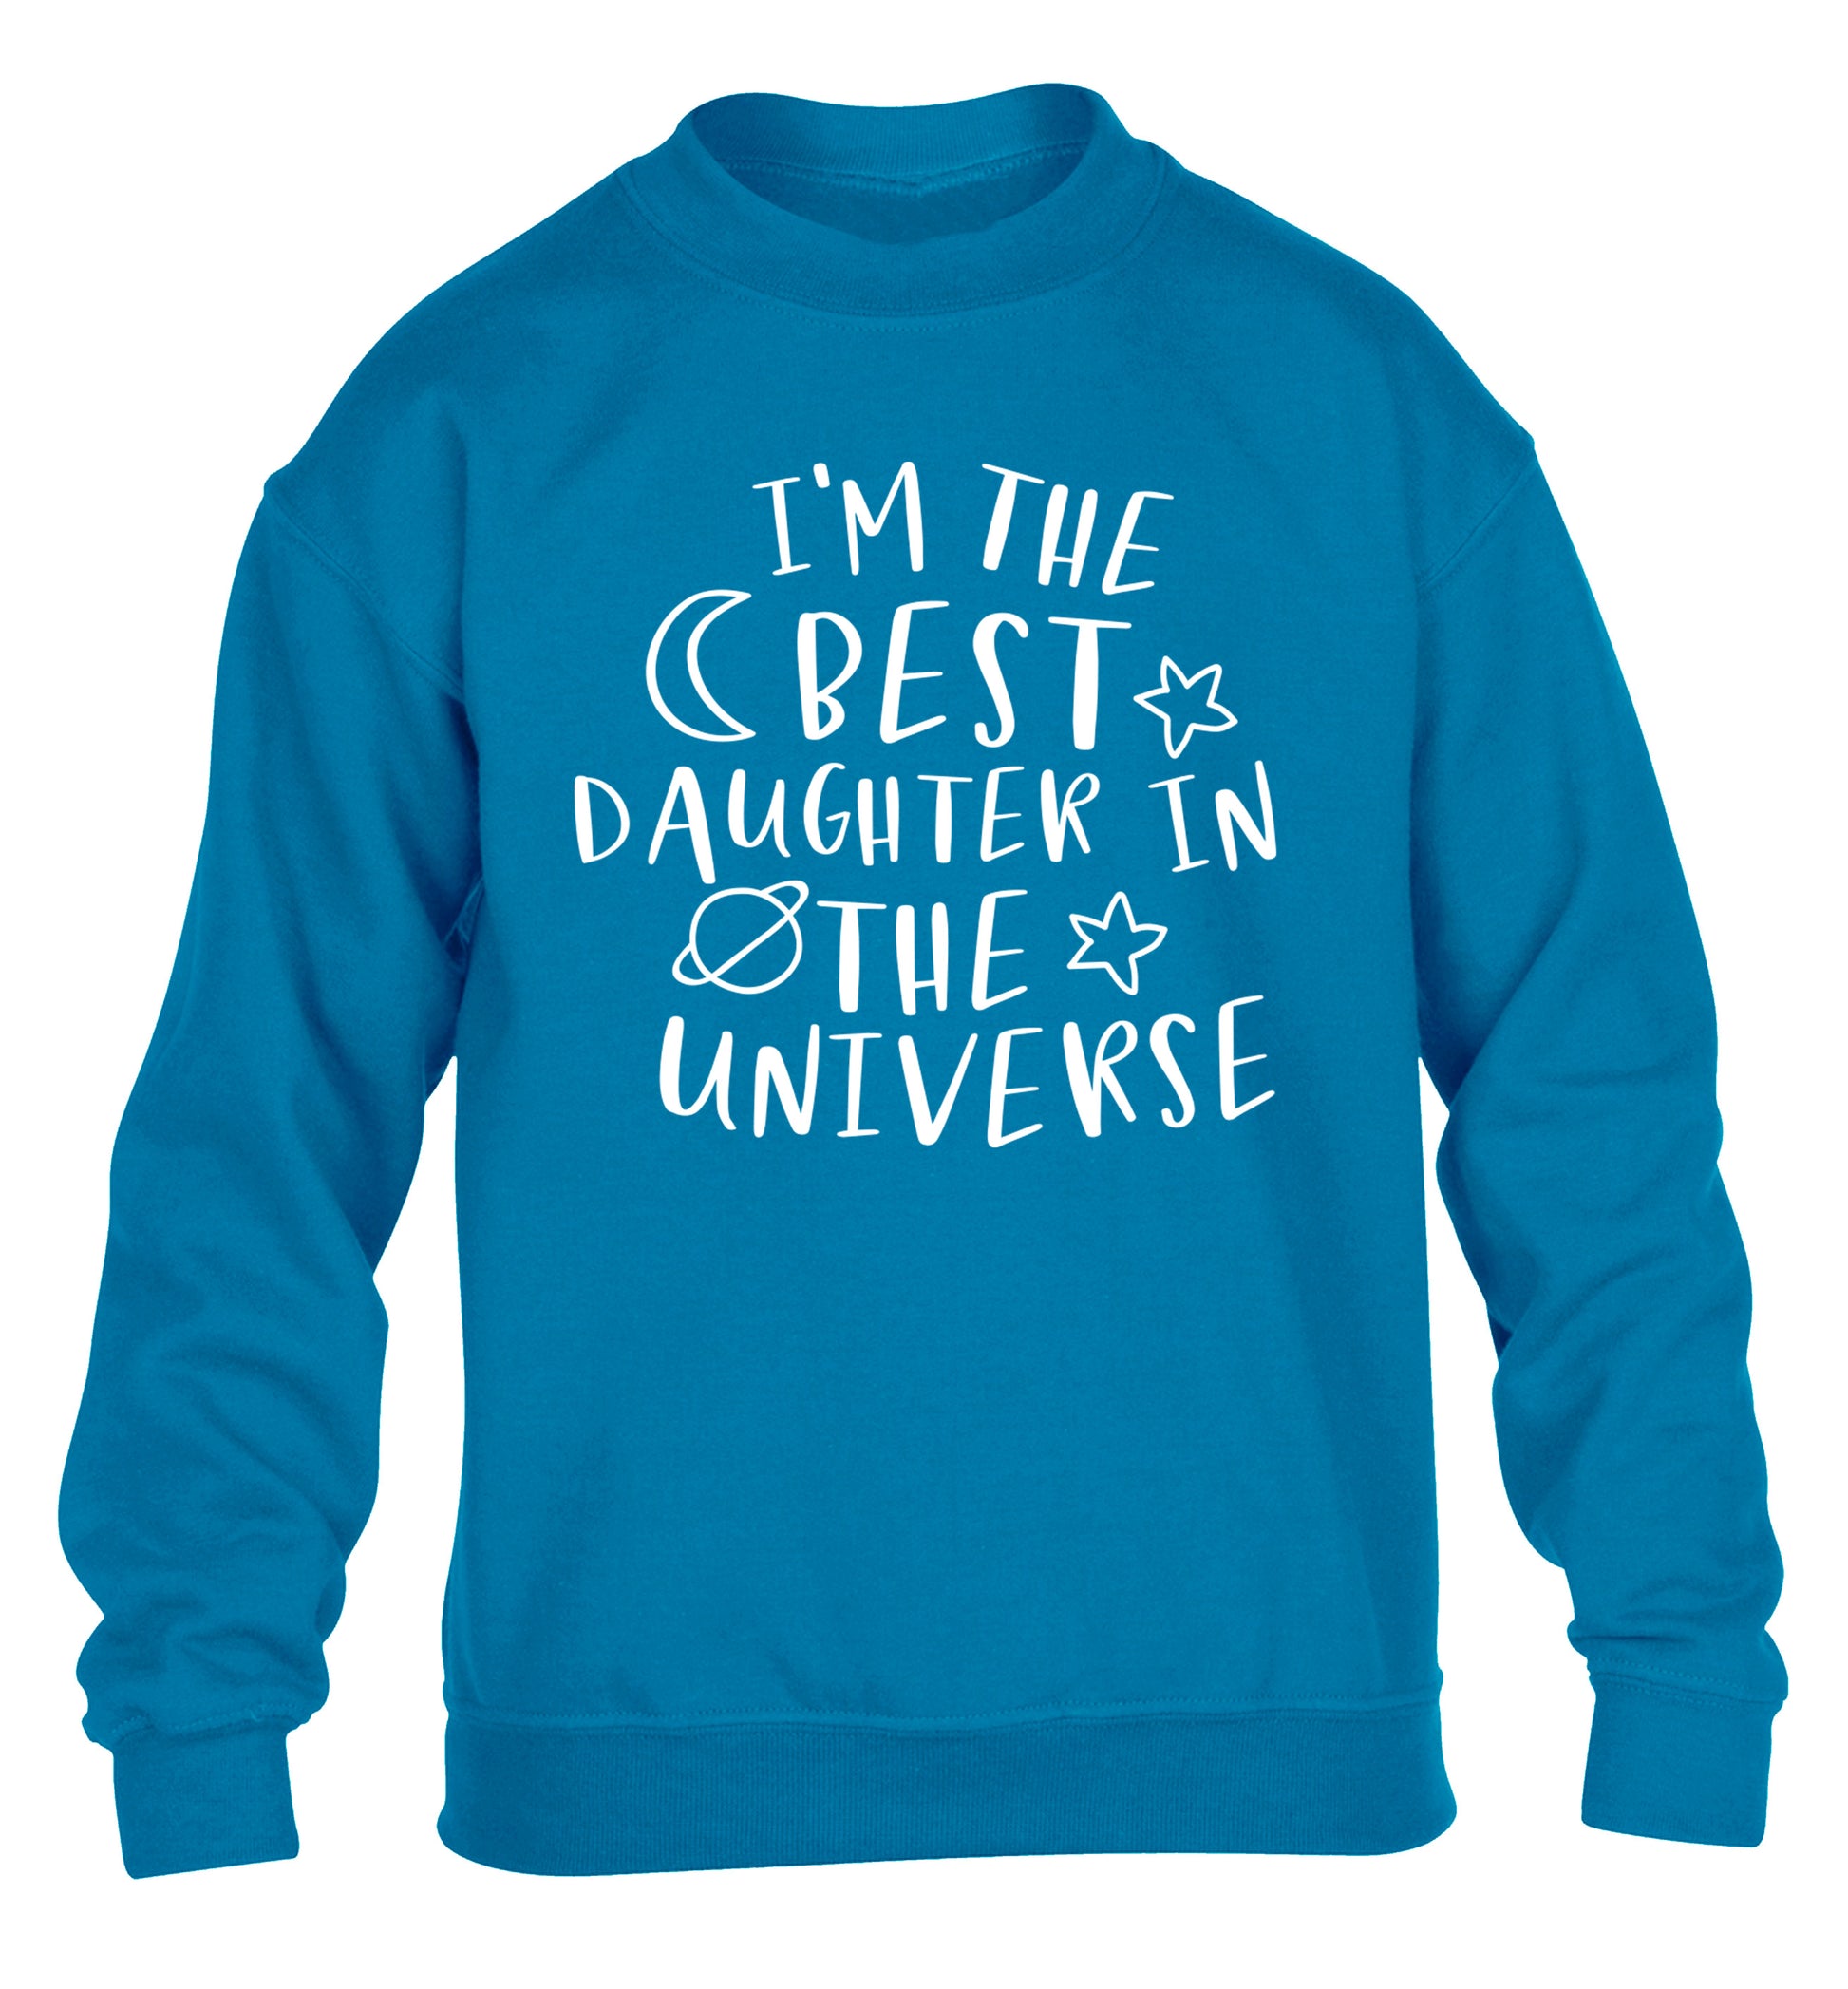 I'm the best daughter in the universe children's blue sweater 12-13 Years